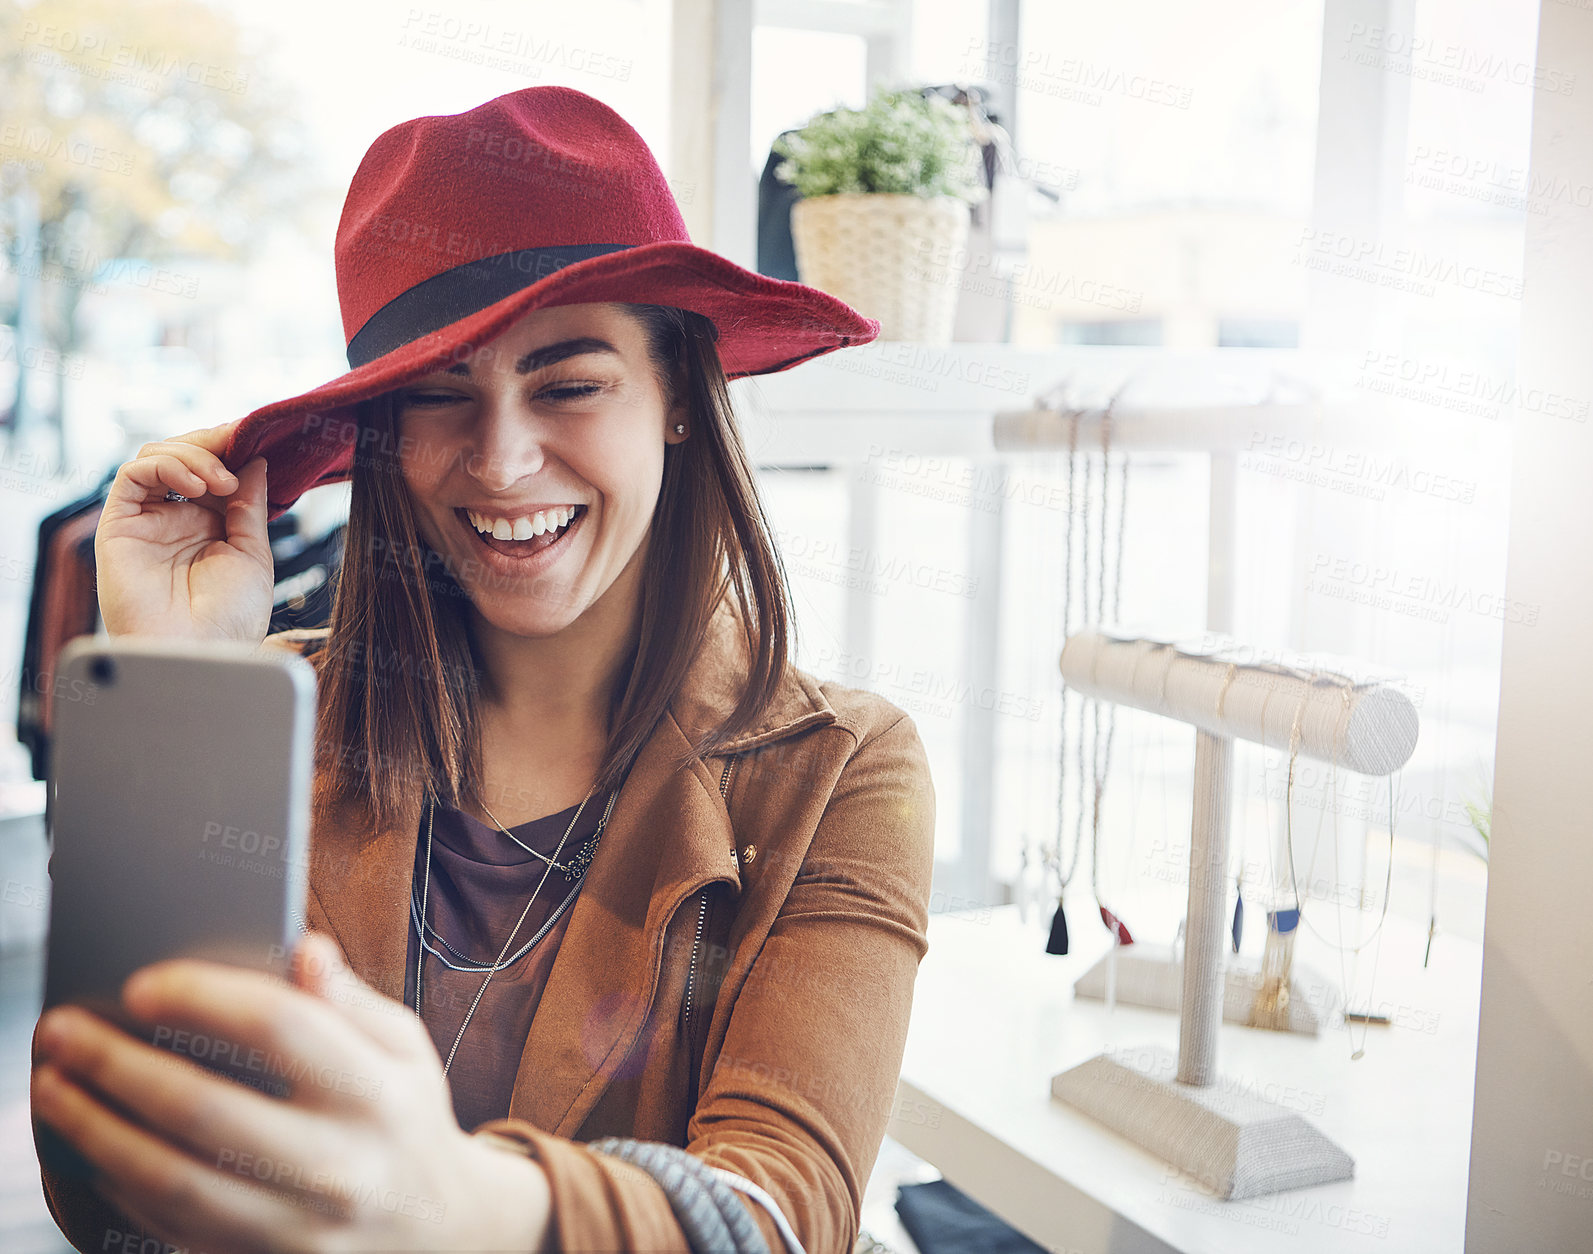 Buy stock photo Cropped shot of an attractive young woman snapping selfies while out on a shopping spree